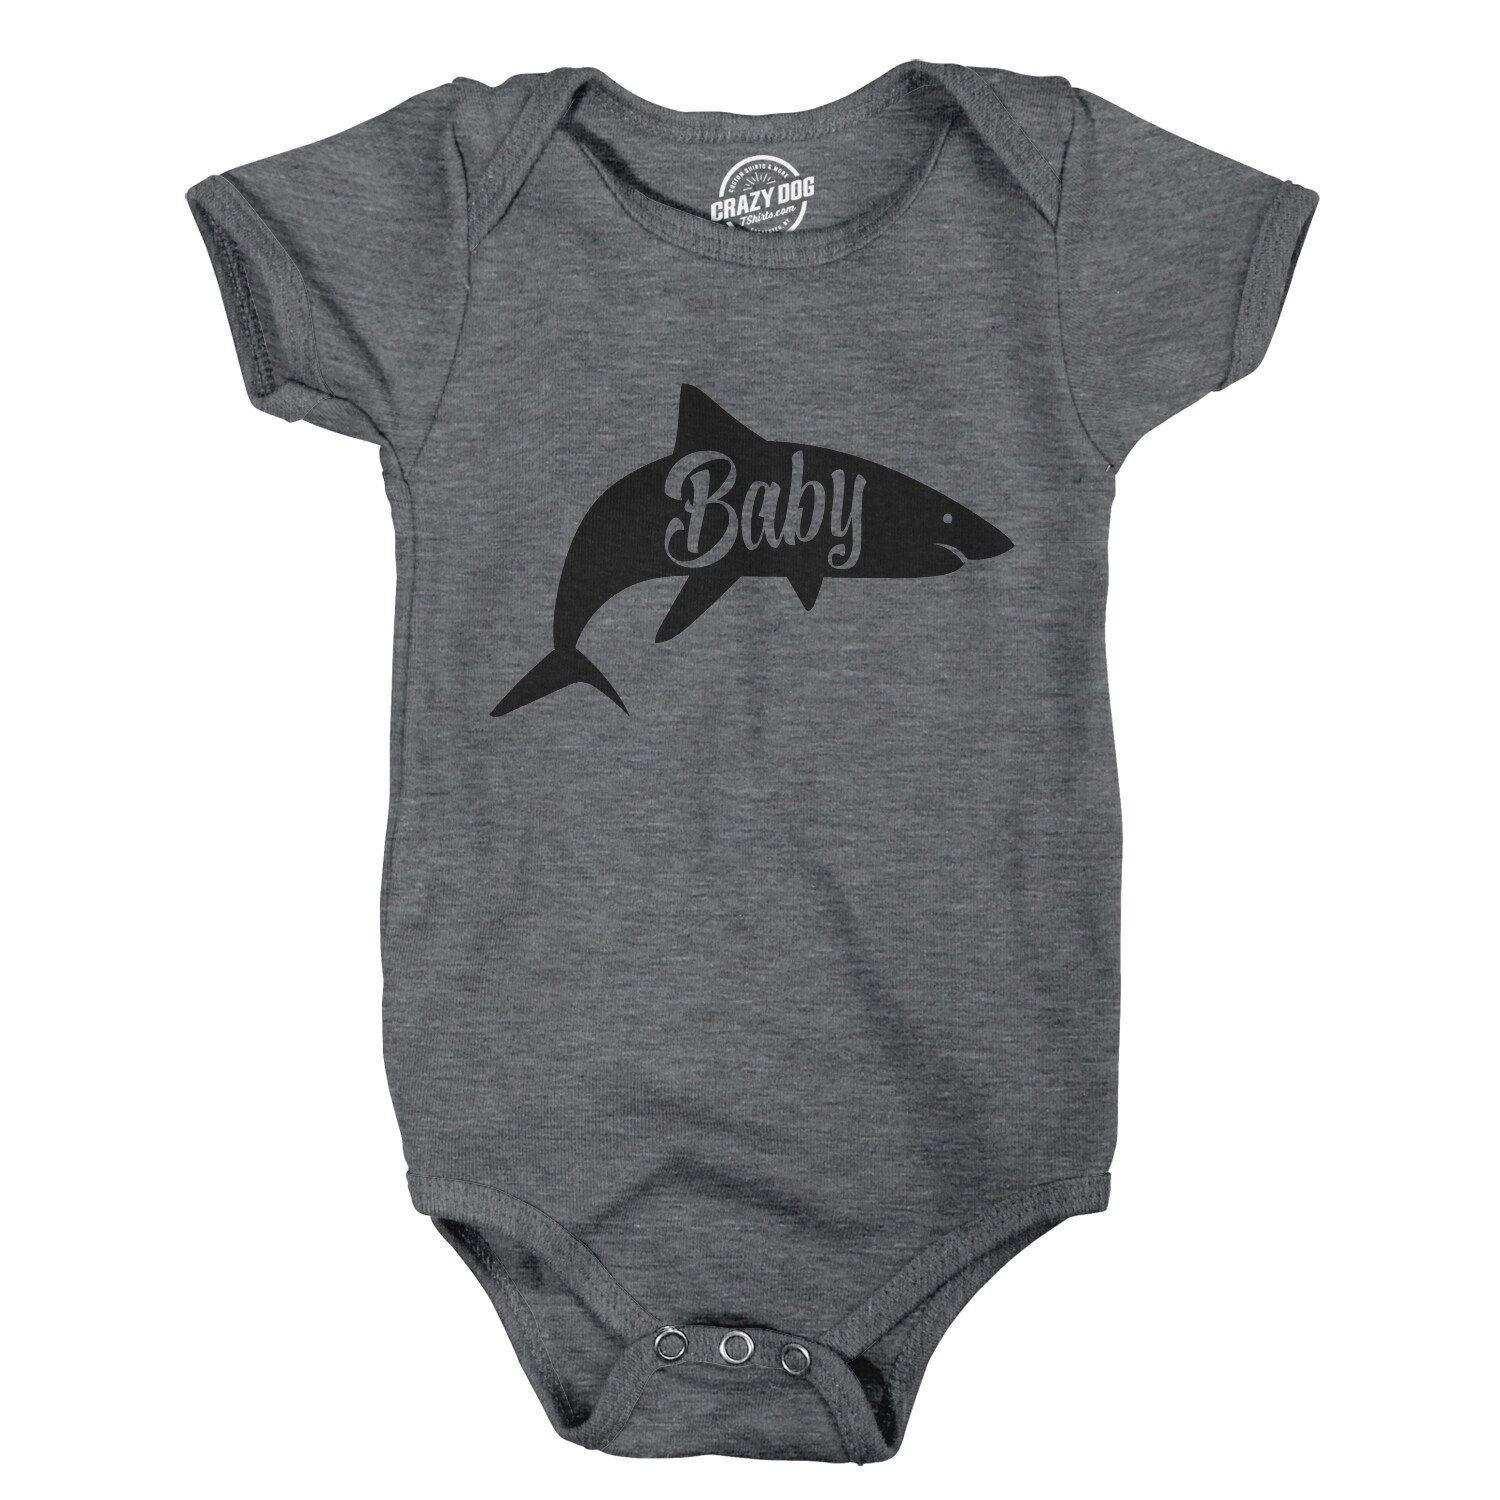 baby shark infant clothes